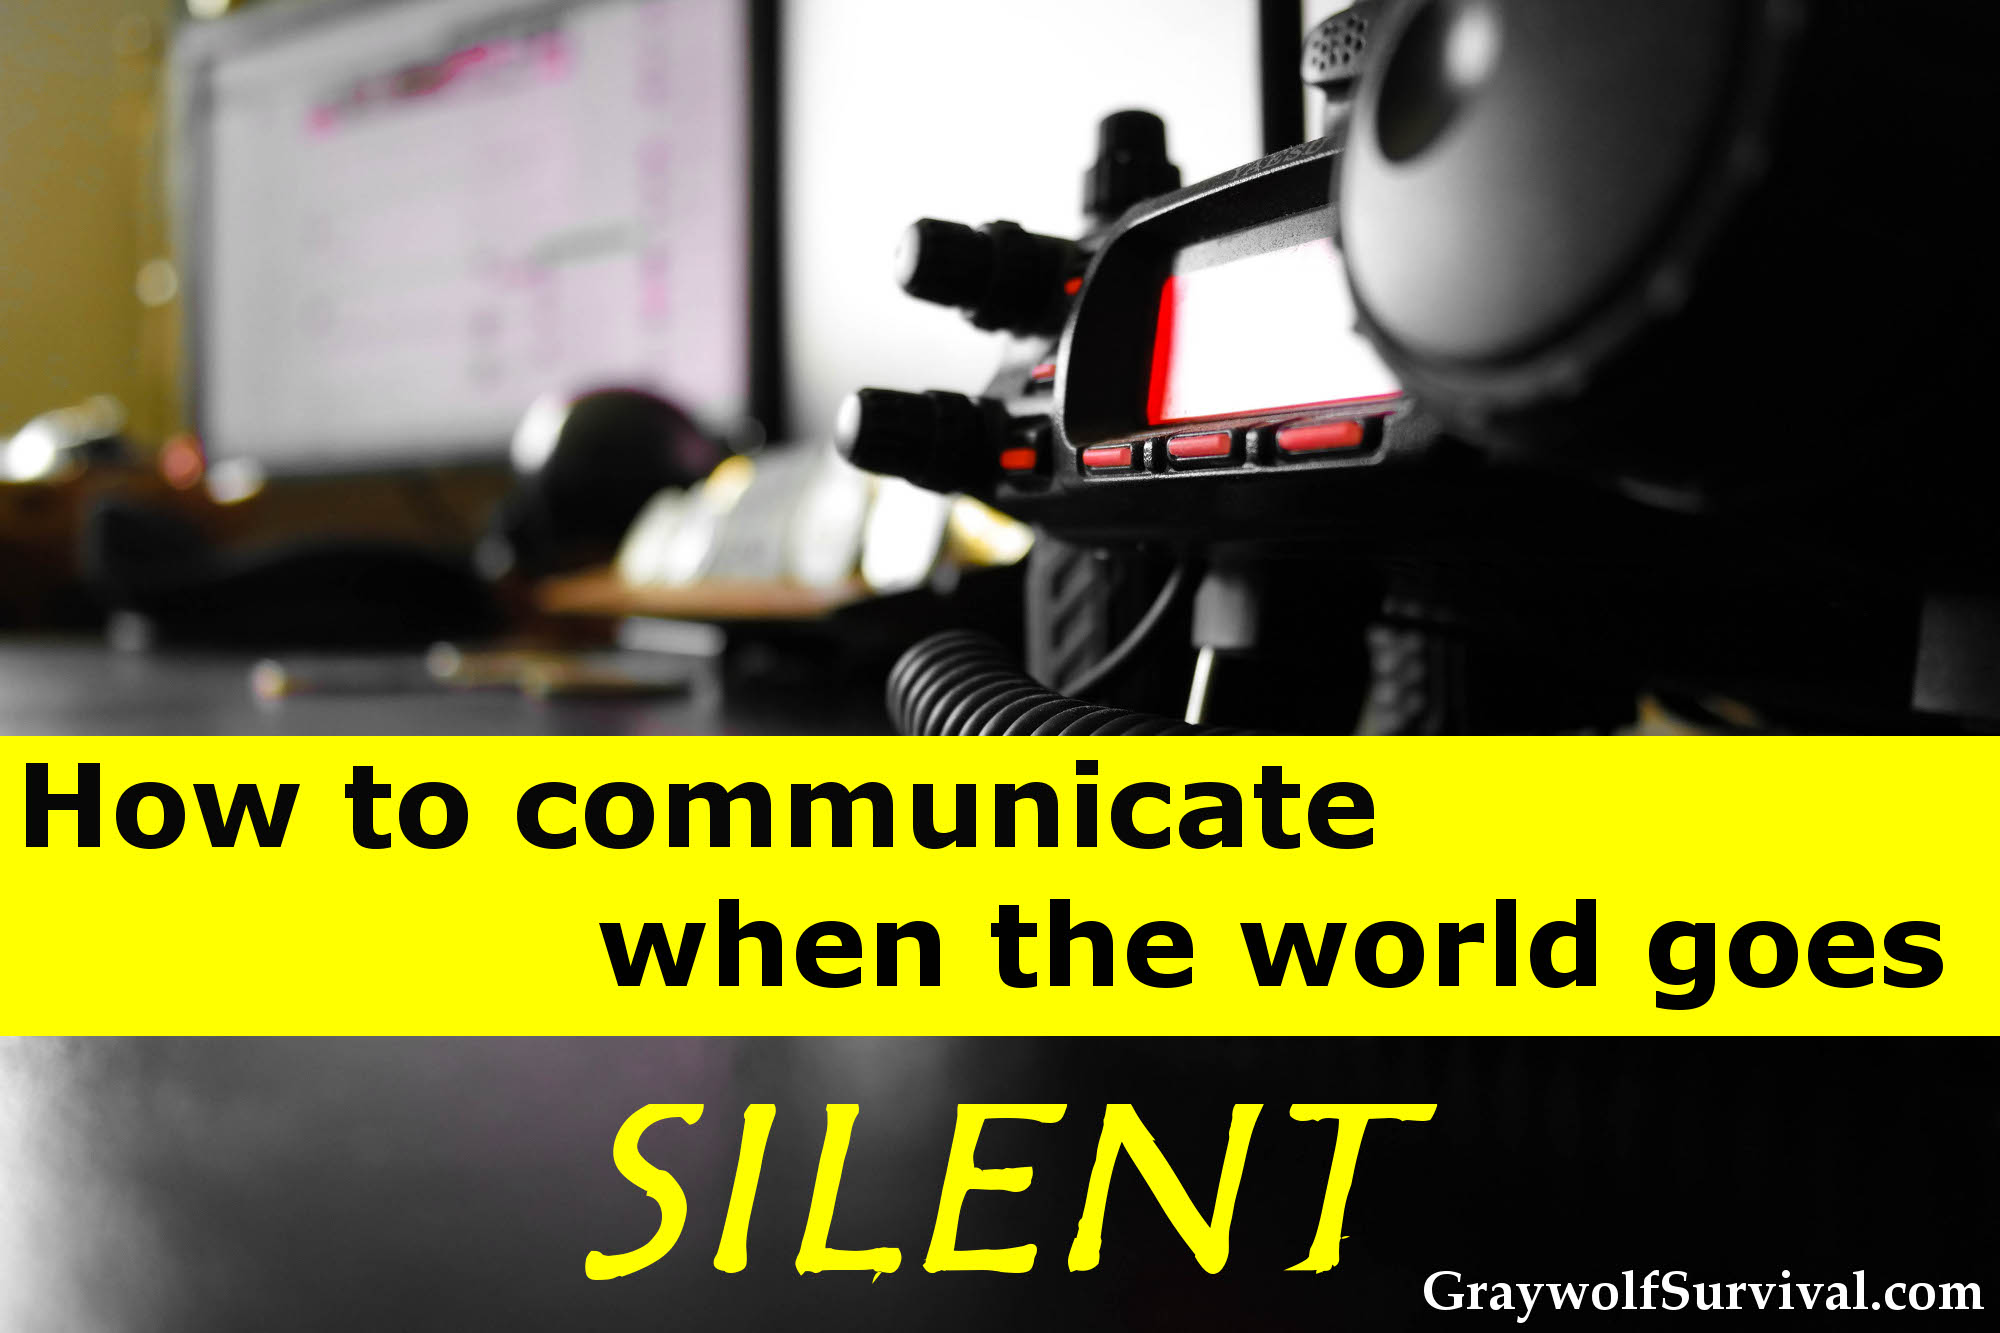 How To Communicate When The World Goes Silent